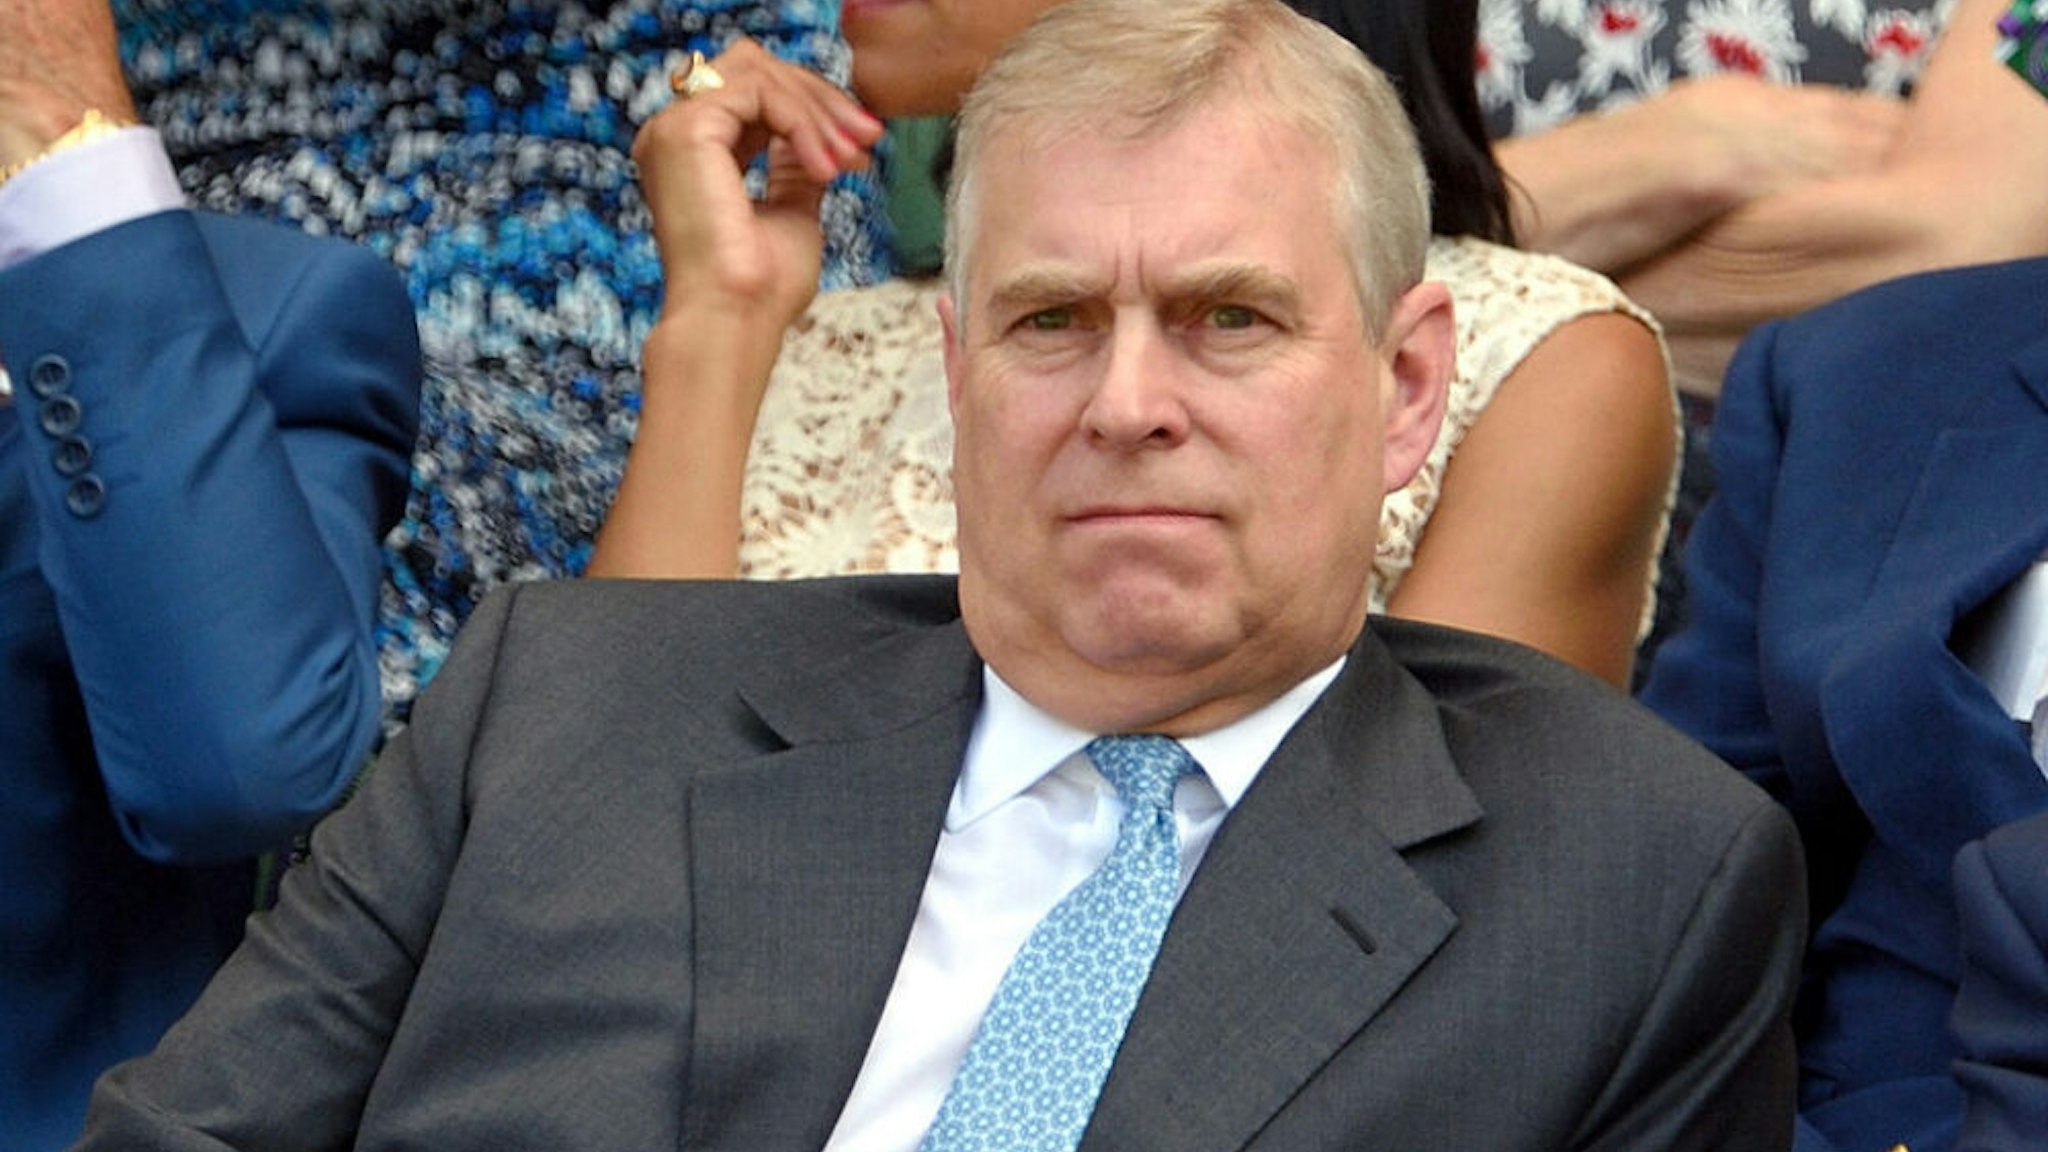 LONDON, ENGLAND - JULY 10: Prince Andrew, Duke of York attends day eleven of the Wimbledon Tennis Championships at Wimbledon on July 10, 2015 in London, England.